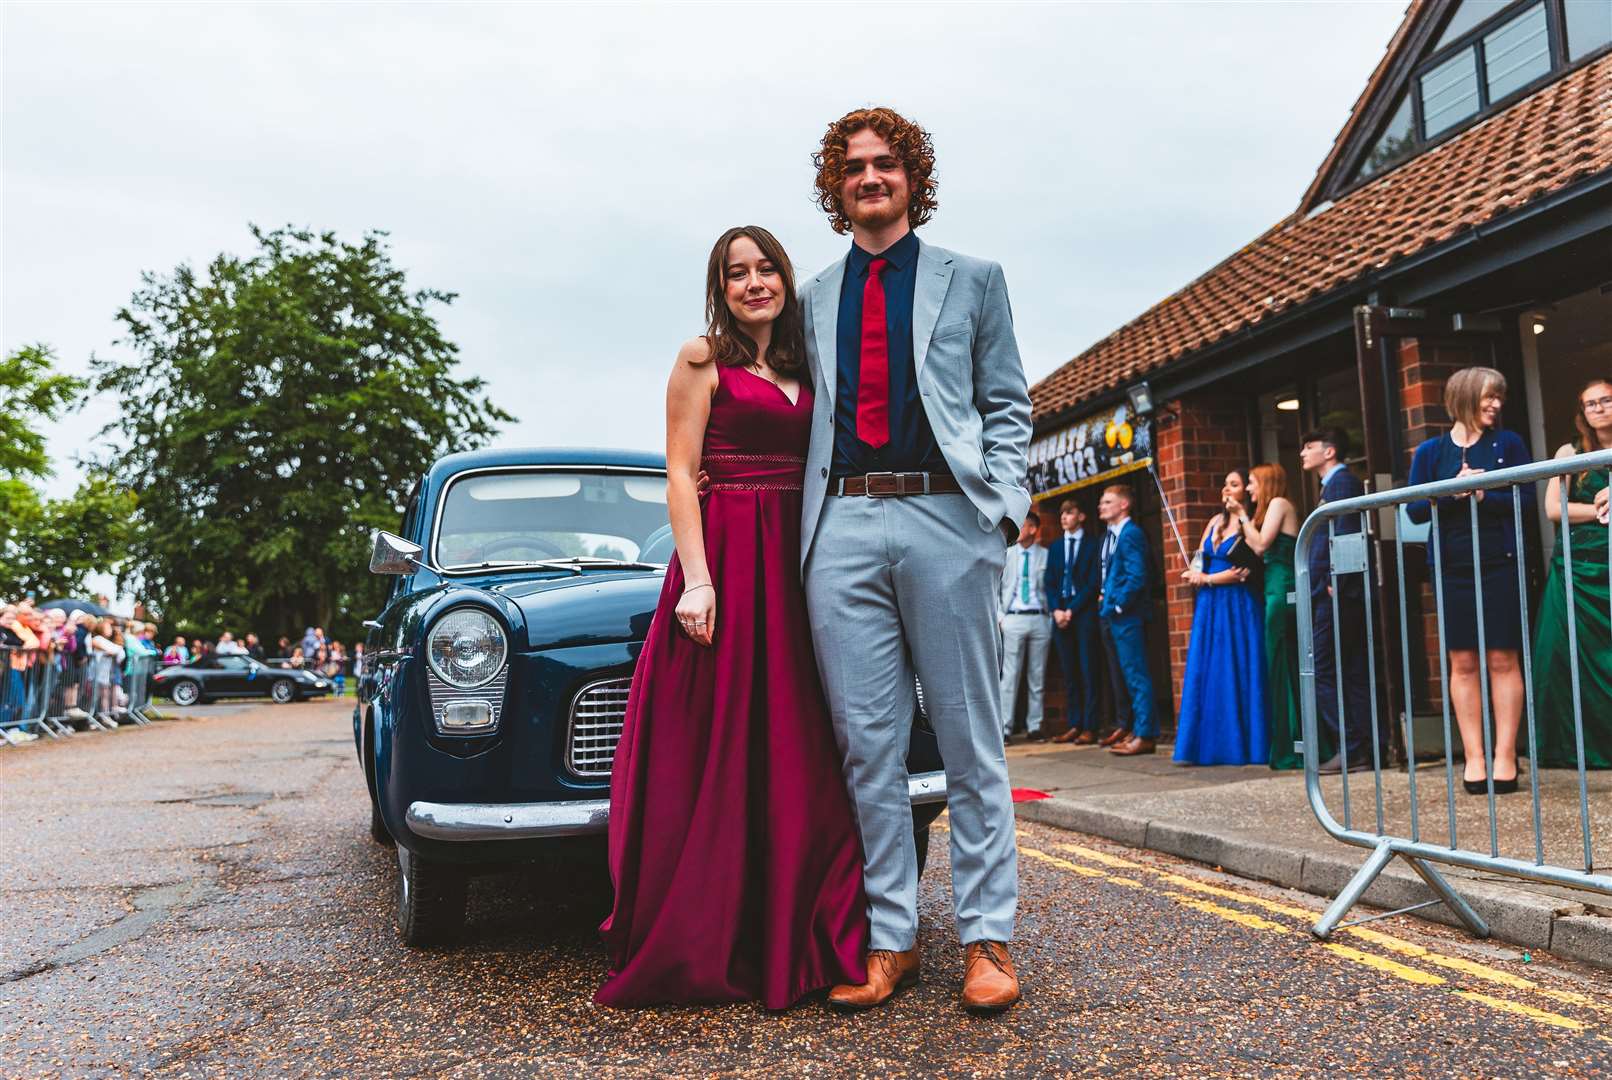 St Clements High School, Terrington St Clement, prom 2023. Picture: AMLE Photography/Barking Dog Media